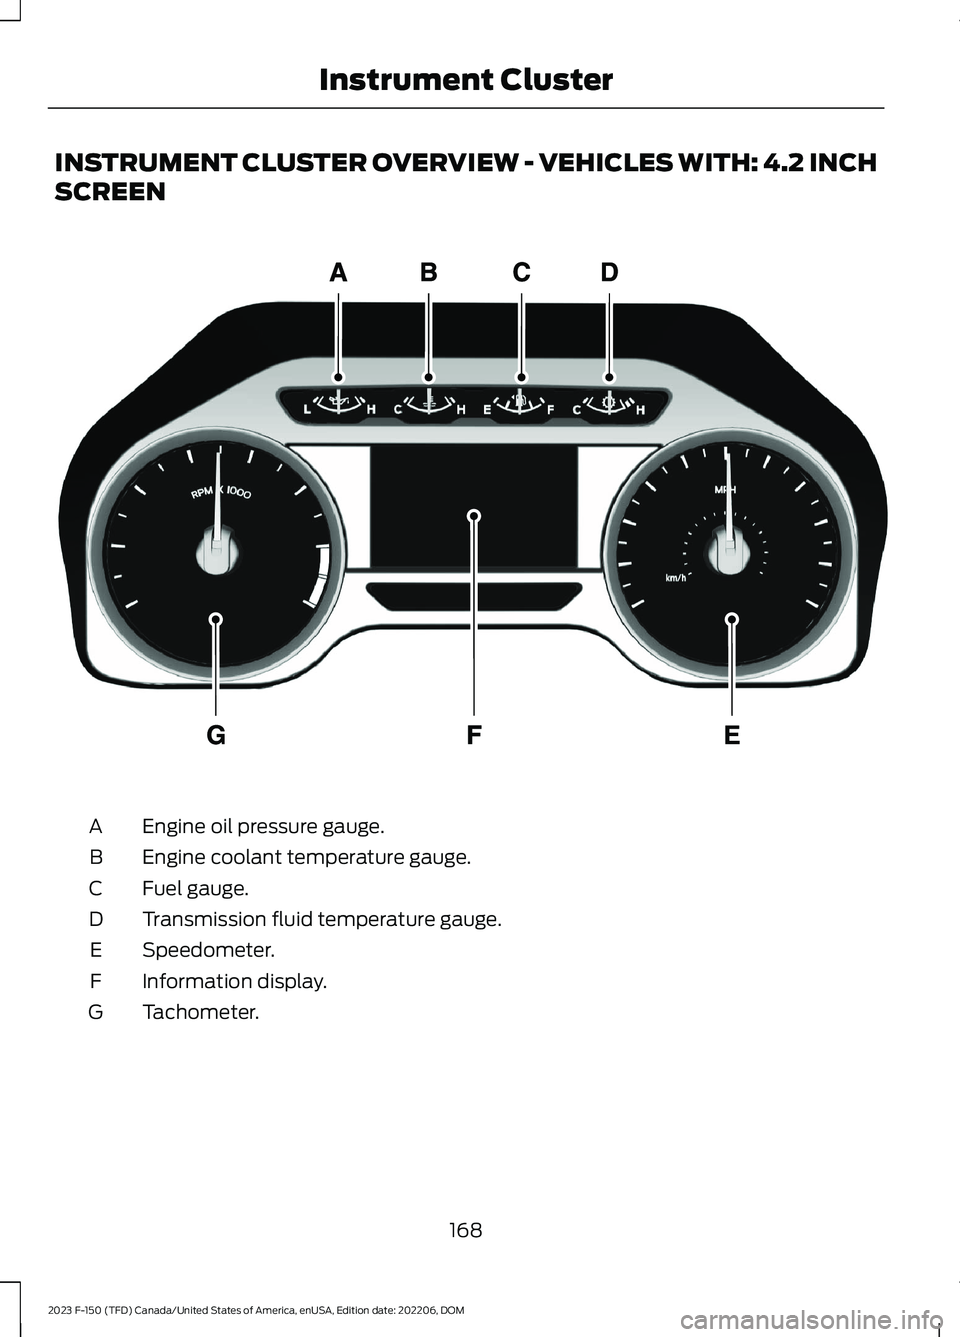 FORD F150 2023  Owners Manual INSTRUMENT CLUSTER OVERVIEW - VEHICLES WITH: 4.2 INCH
SCREEN
Engine oil pressure gauge.A
Engine coolant temperature gauge.B
Fuel gauge.C
Transmission fluid temperature gauge.D
Speedometer.E
Informatio